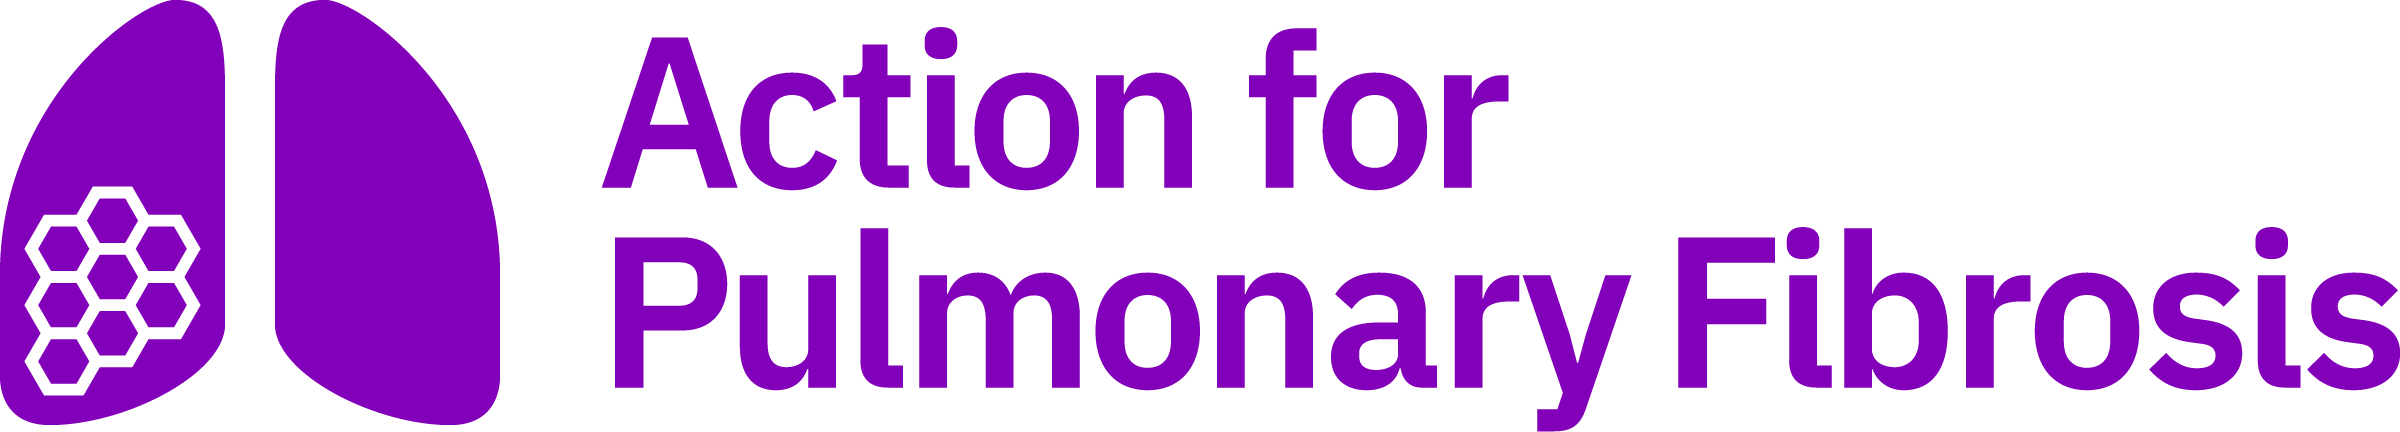 Logo for Action for Pulmonary Fibrosis